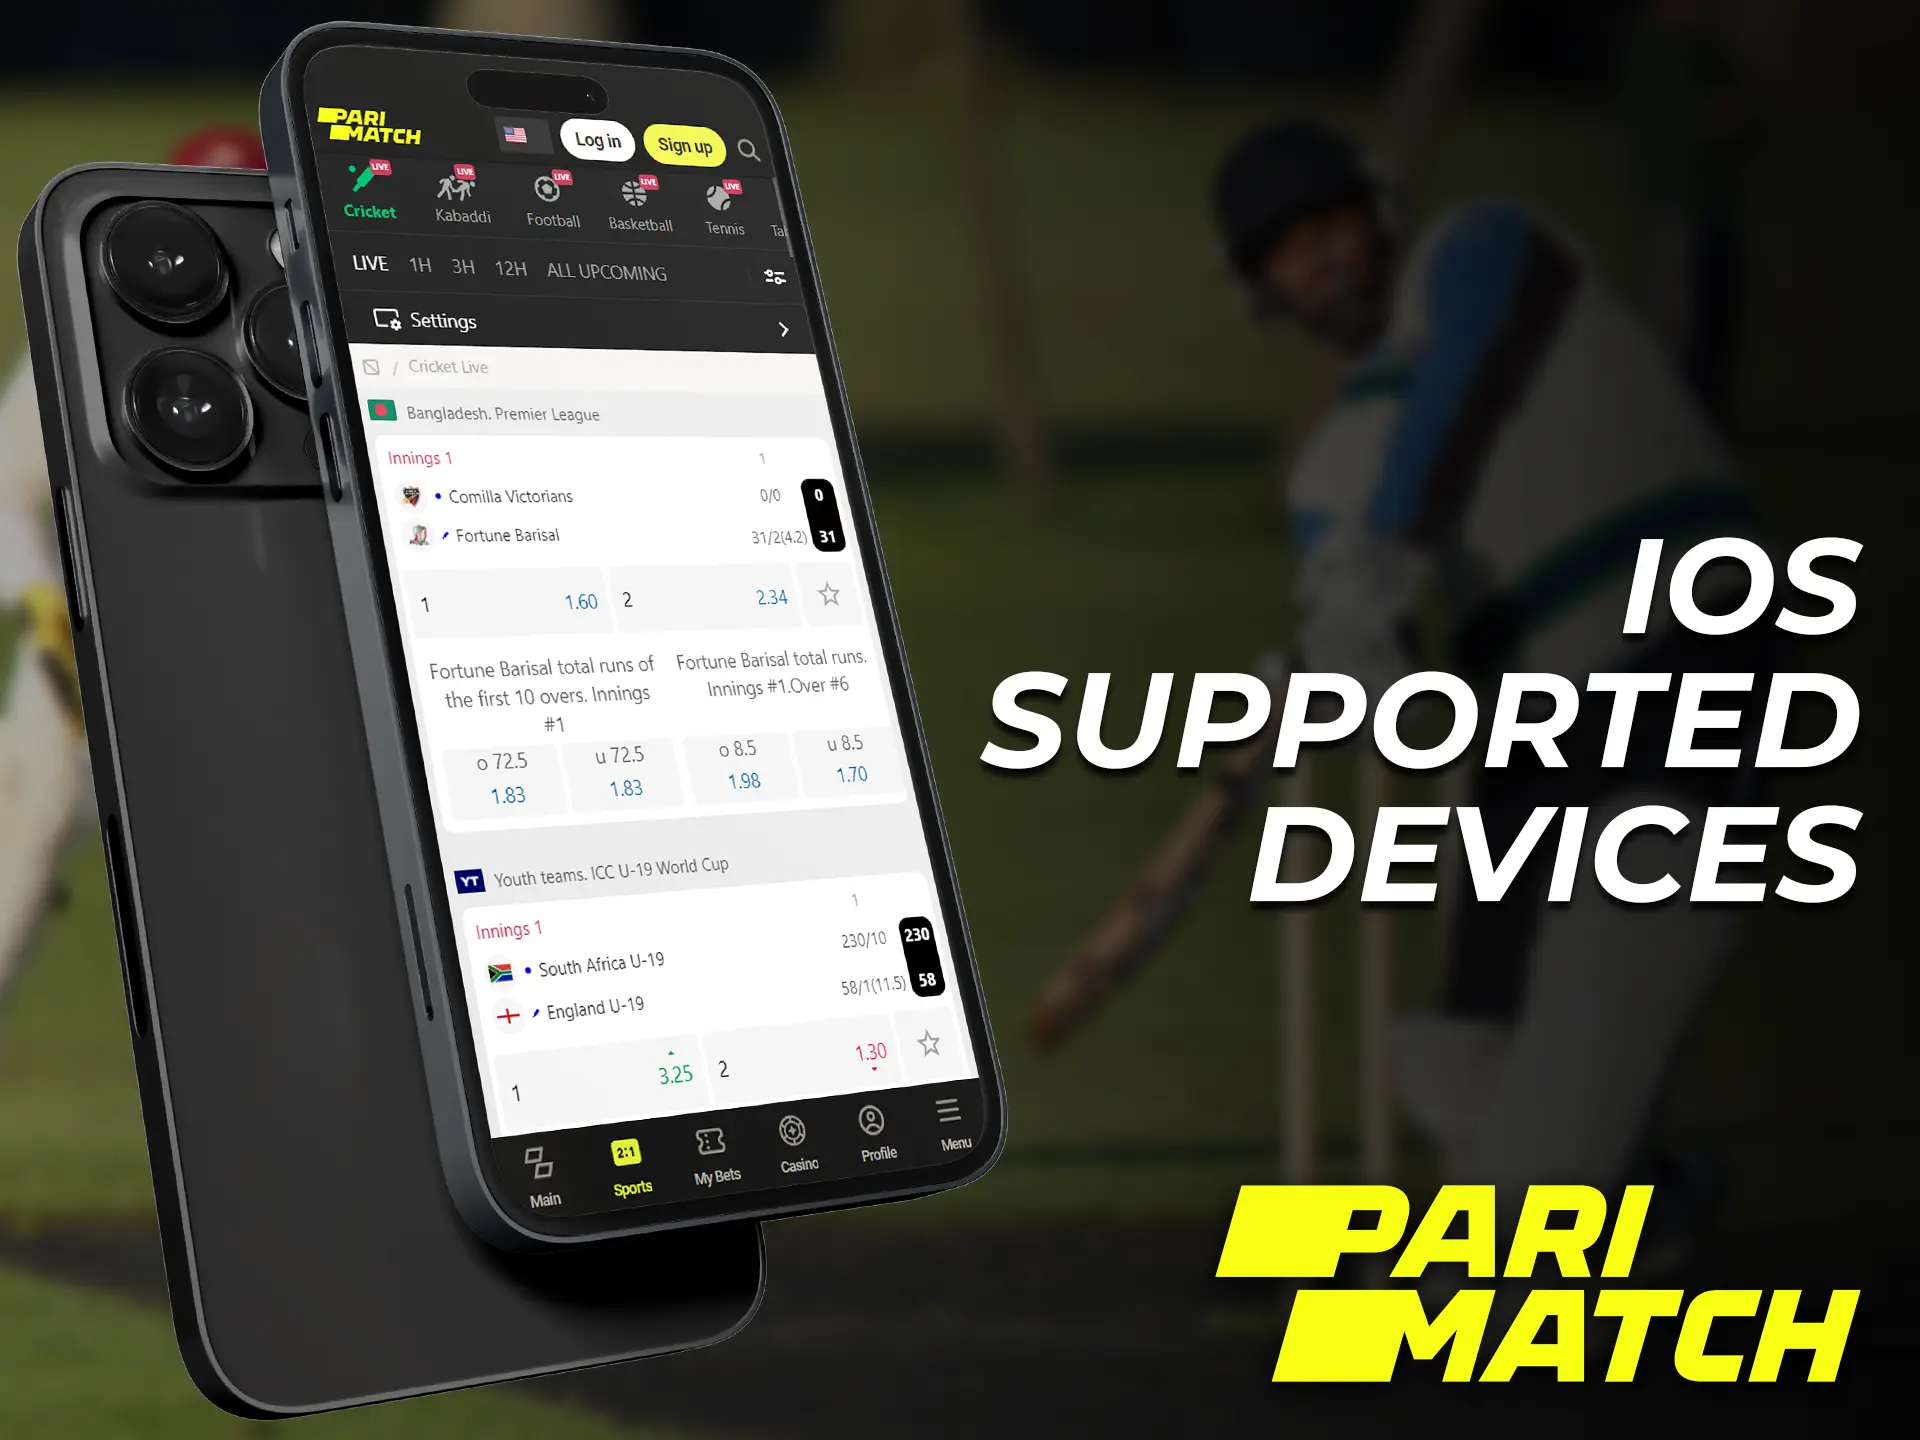 The Parimatch app runs on iOS version 10.0 or later.